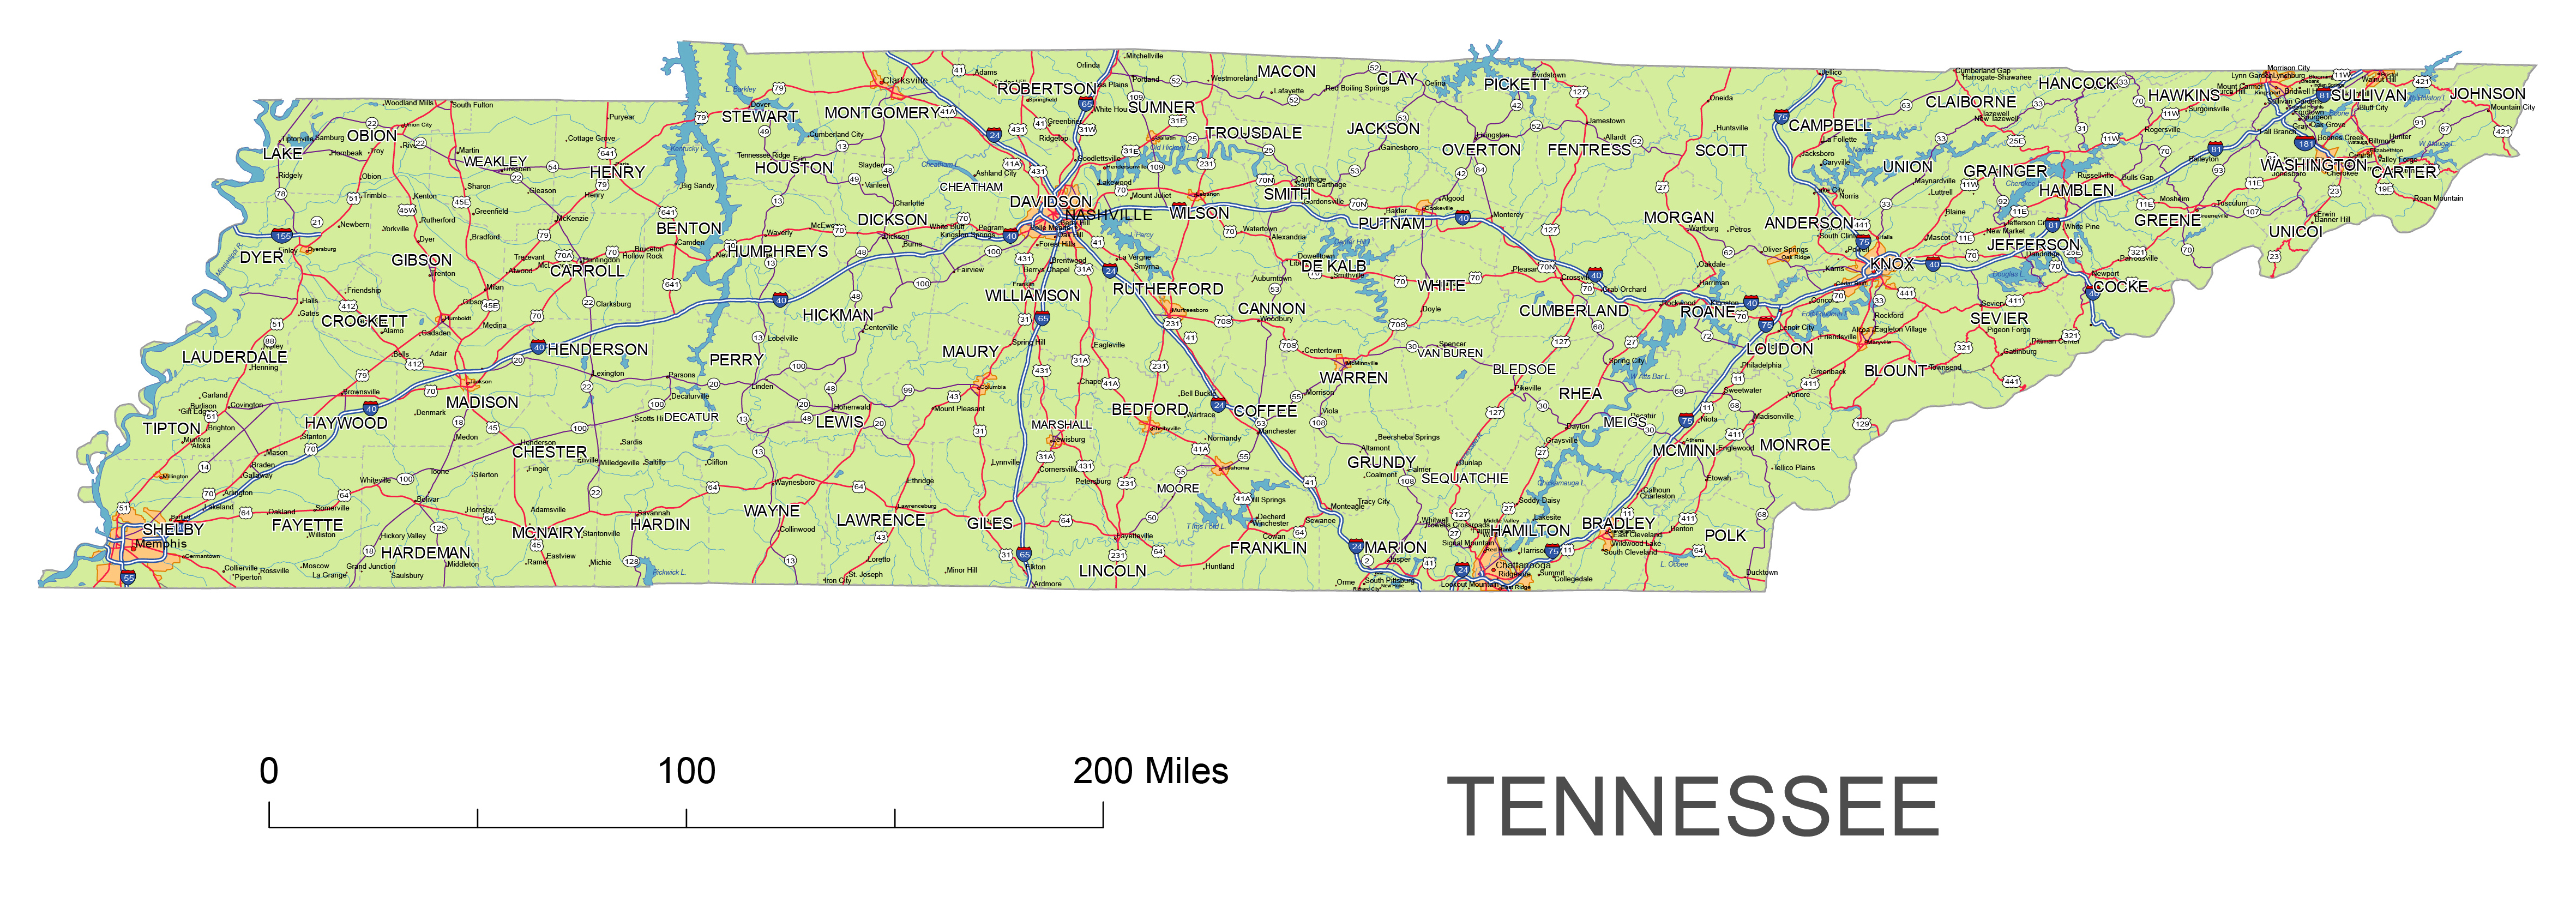 Tennessee State vector road map. lossless scalable AI,PDF map for